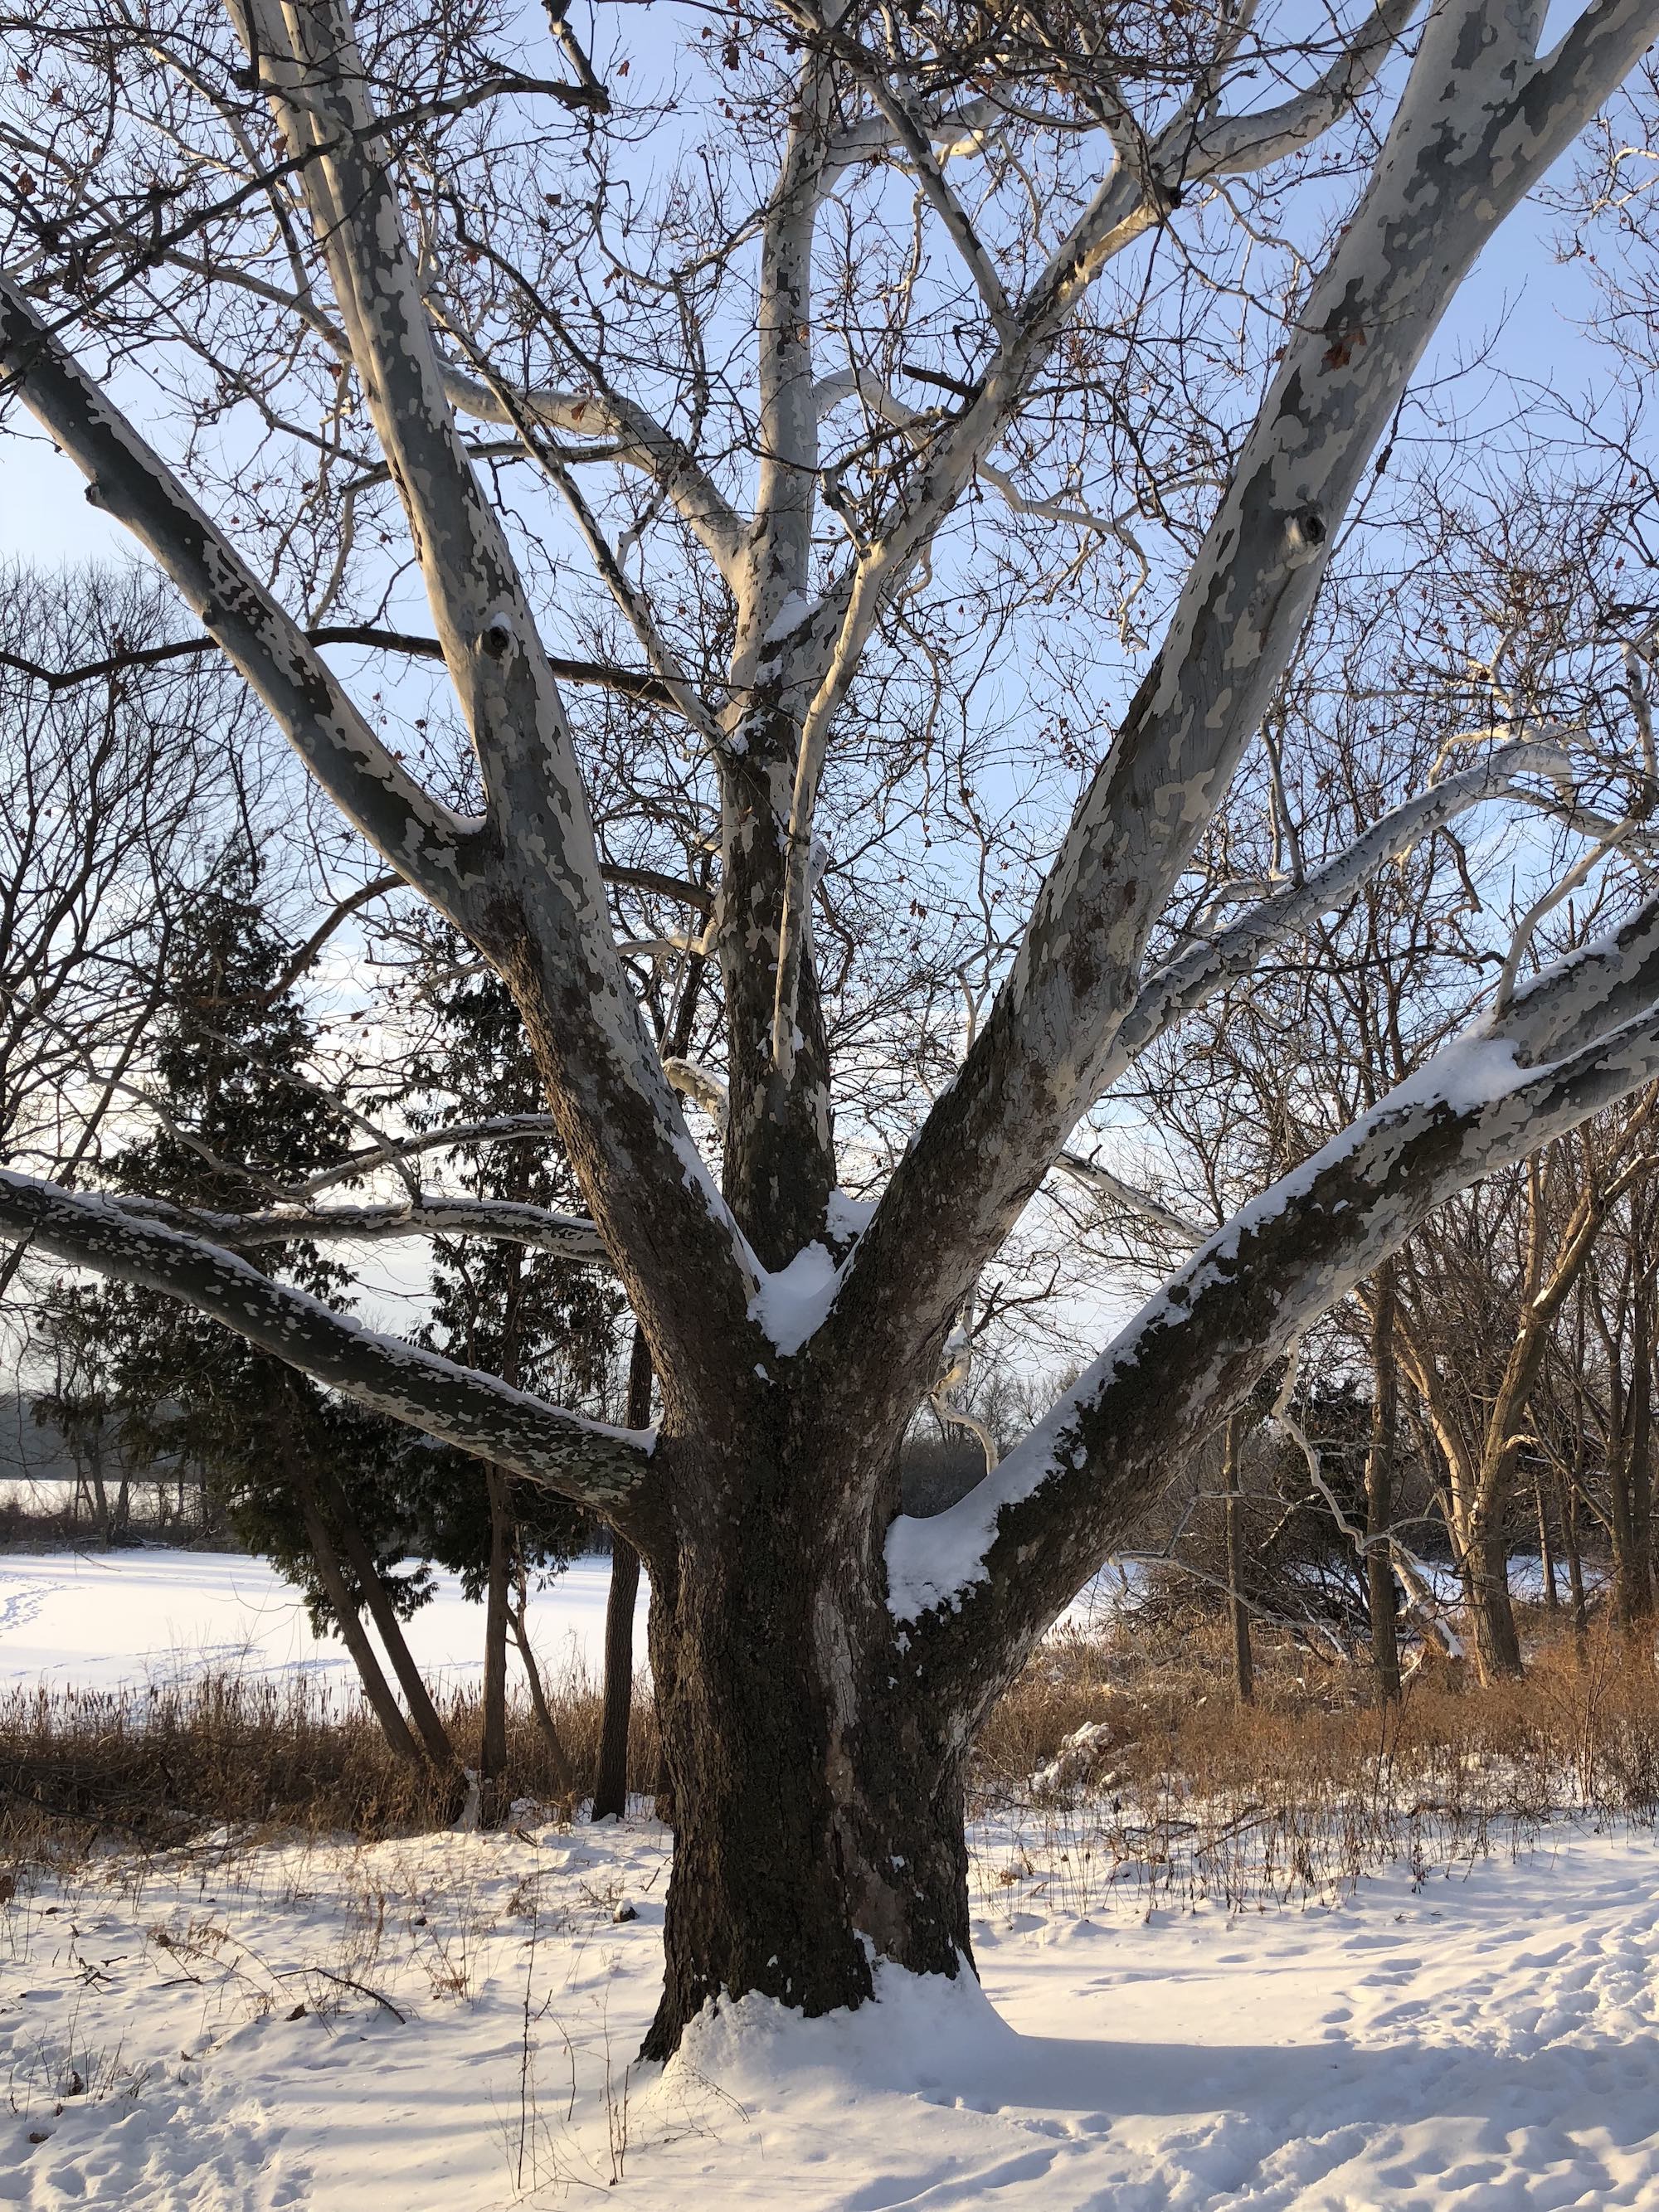 Sycamore tree between Ho-Nee-Um Pond and Arbor Drive on north shore of Lake Wingra on February 8, 2018.